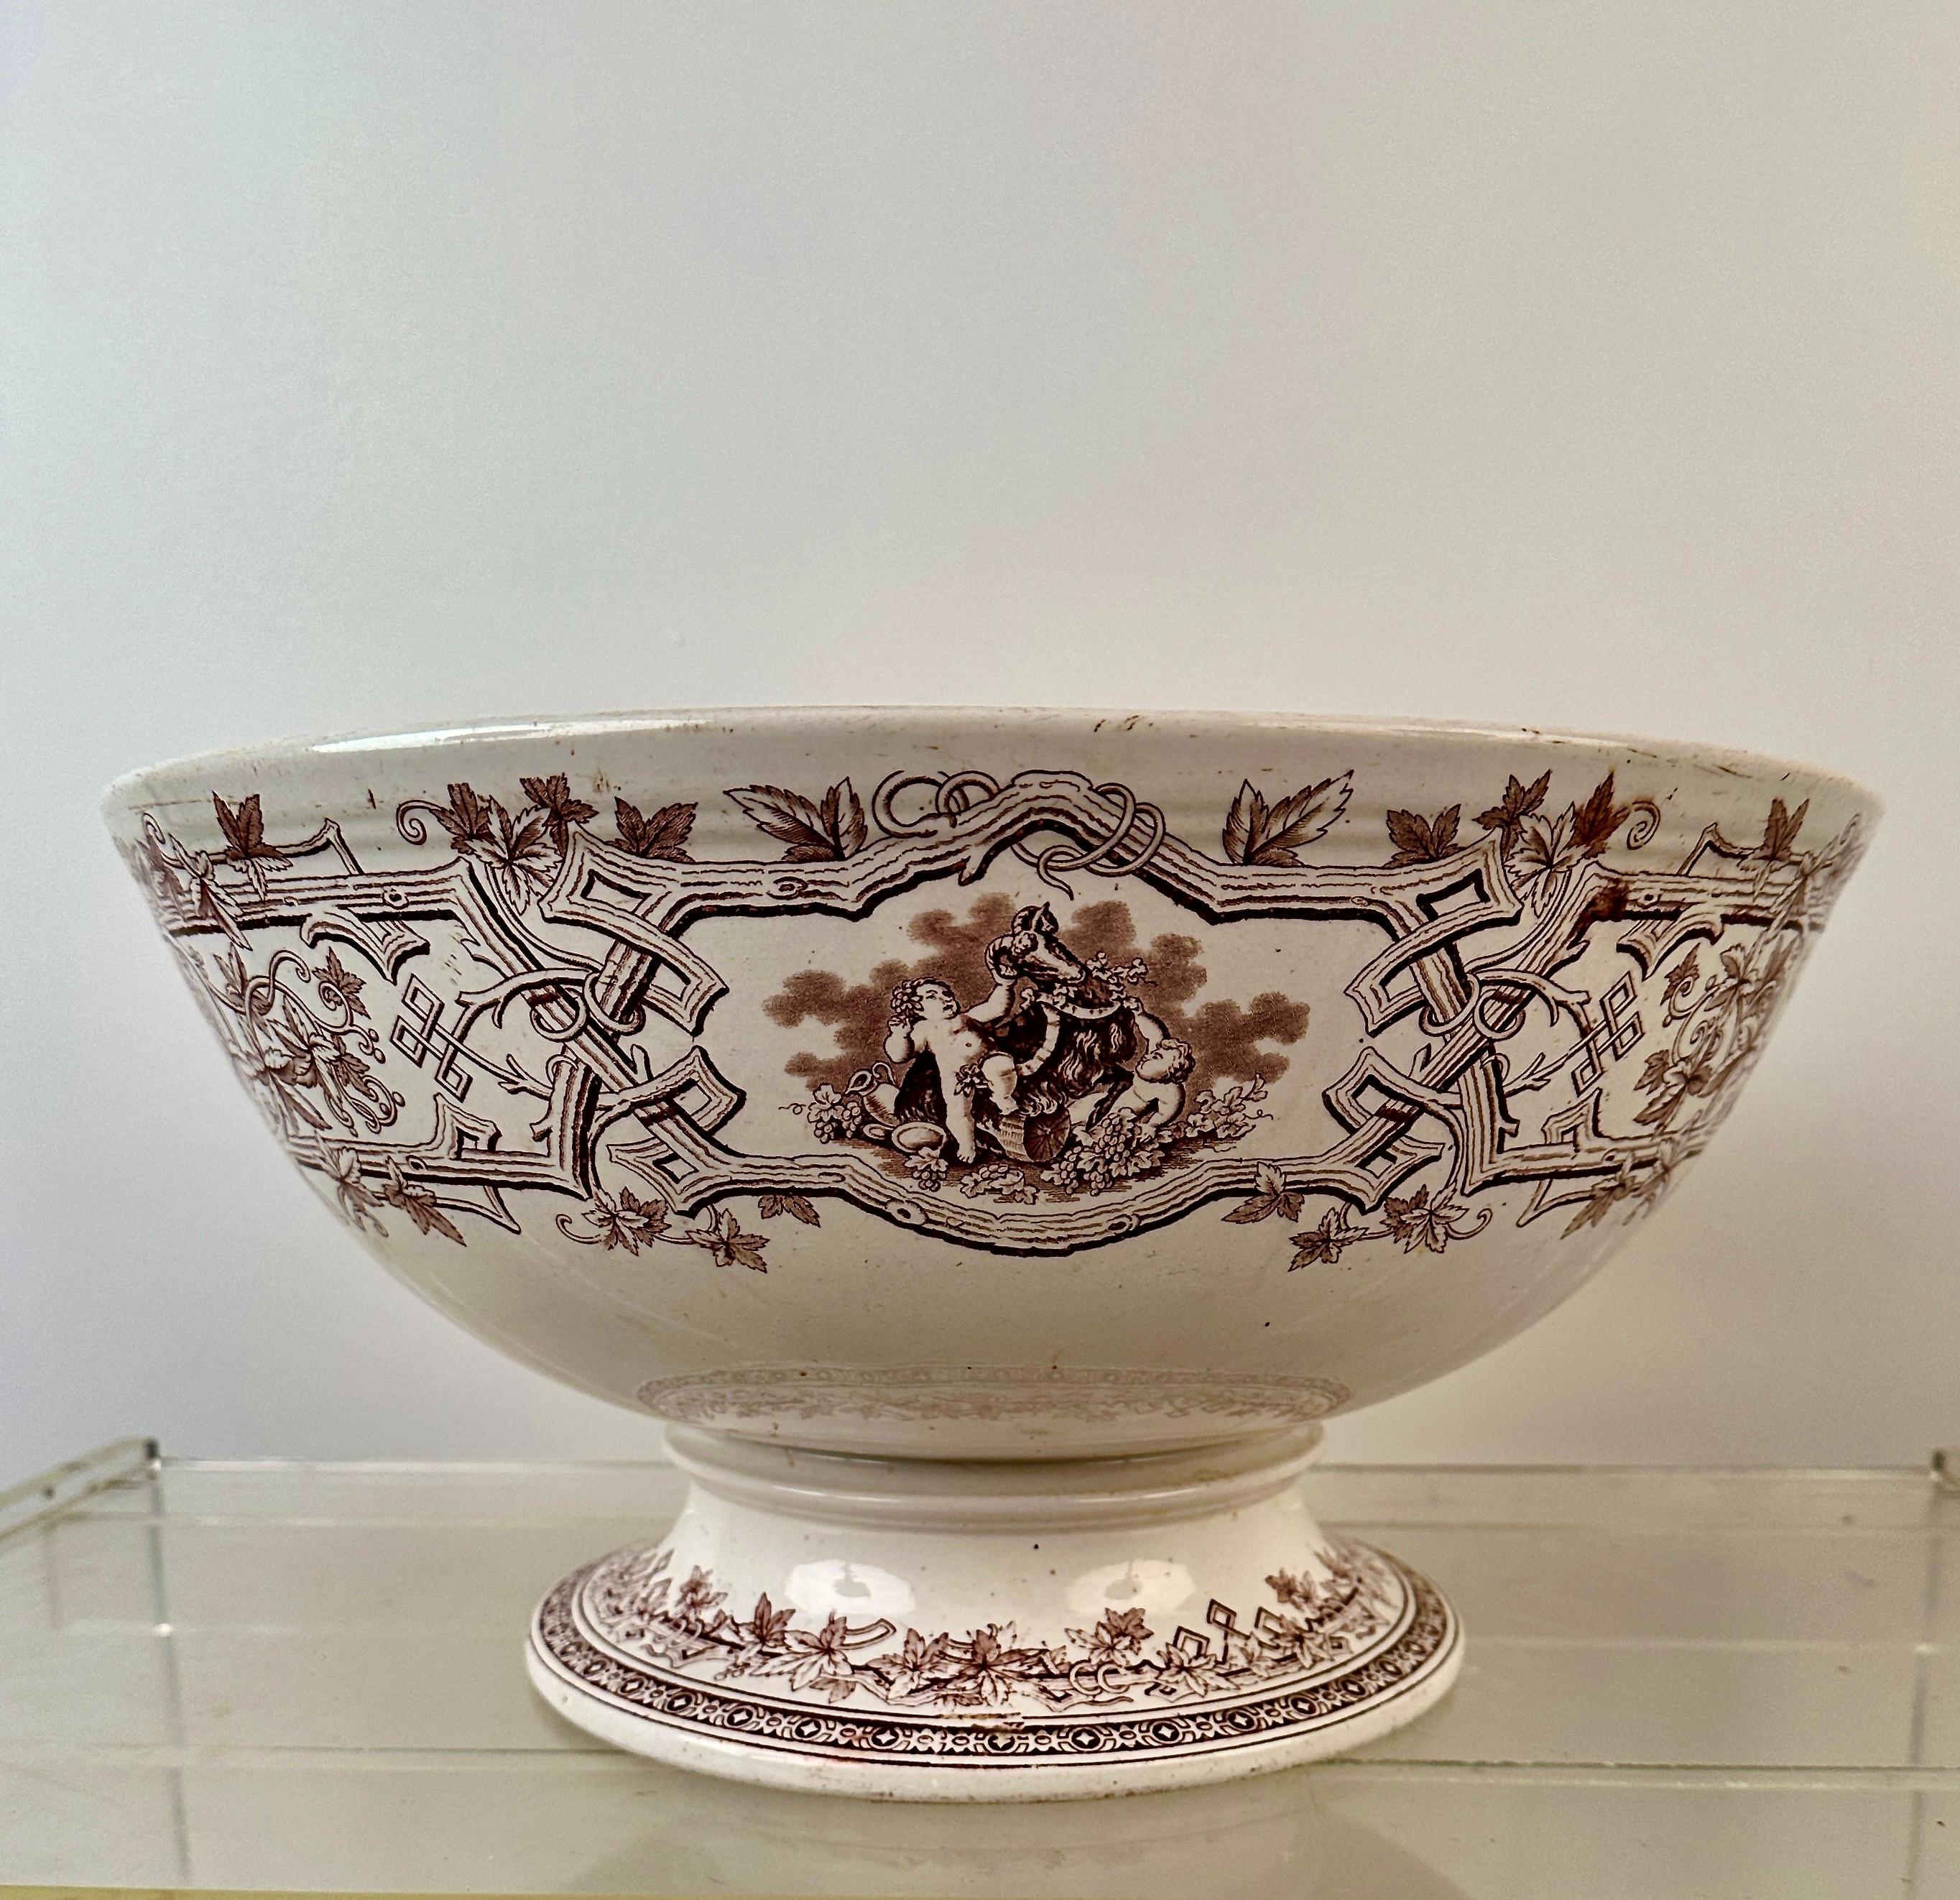 !9th C English Transferware Punch Bowl by Furnival In Good Condition For Sale In Norwalk, CT